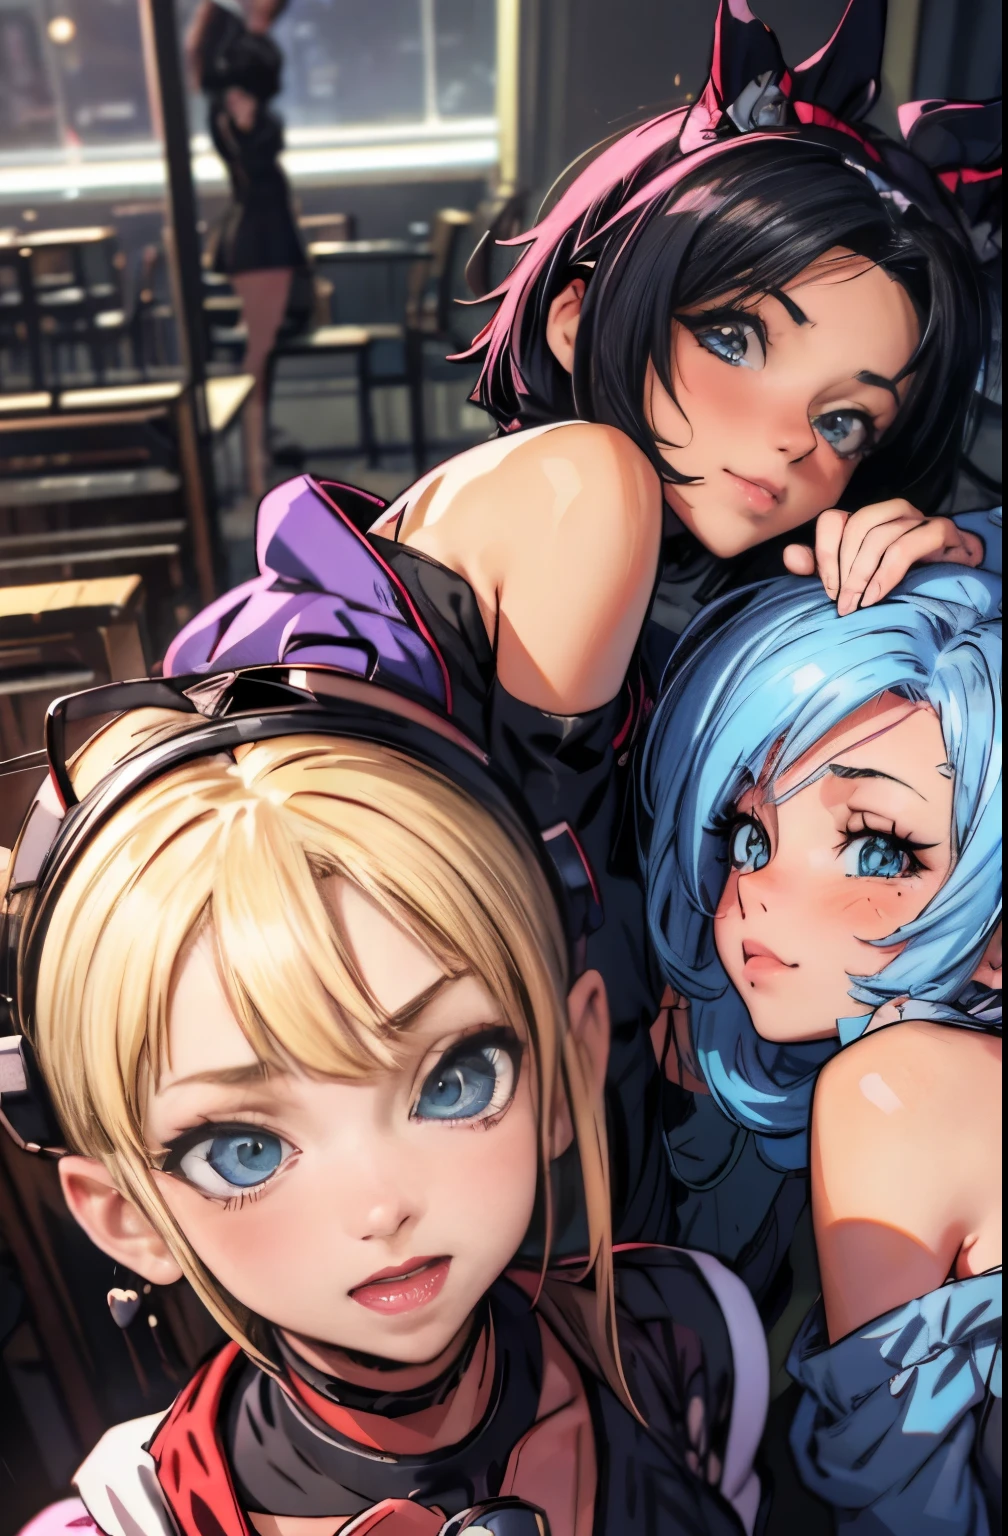 three anime characters are posing for a picture together, saiyan girl, ecchi anime style, dragon ball style, bulma from dragon ball, in anime style, hq artwork, fan art, high quality fanart, dragon ball z style, anime girls, android 18, official fanart, hd artwork, dragon ball artstyle, :14 80s anime style